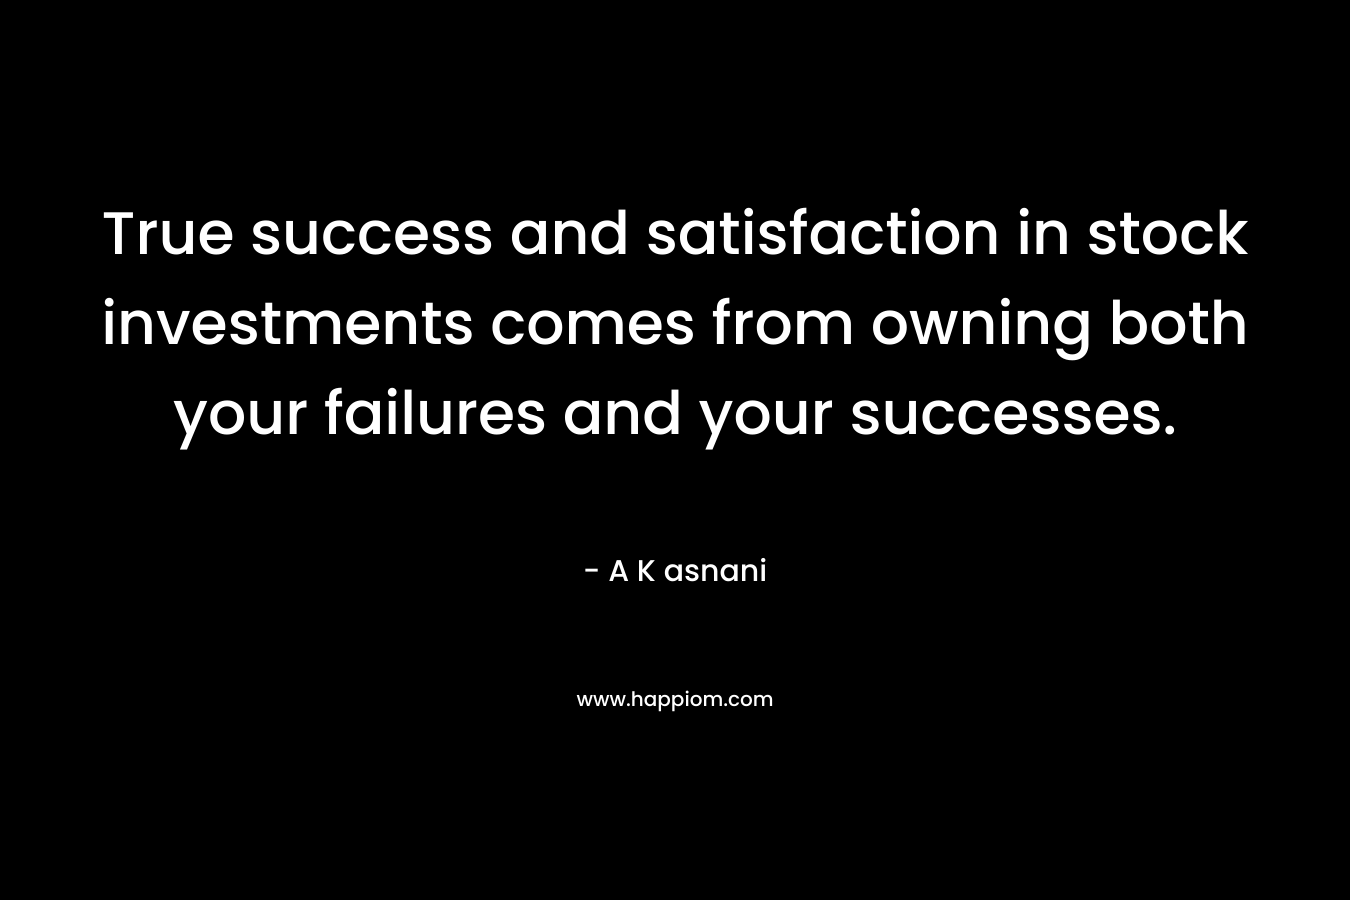 True success and satisfaction in stock investments comes from owning both your failures and your successes.